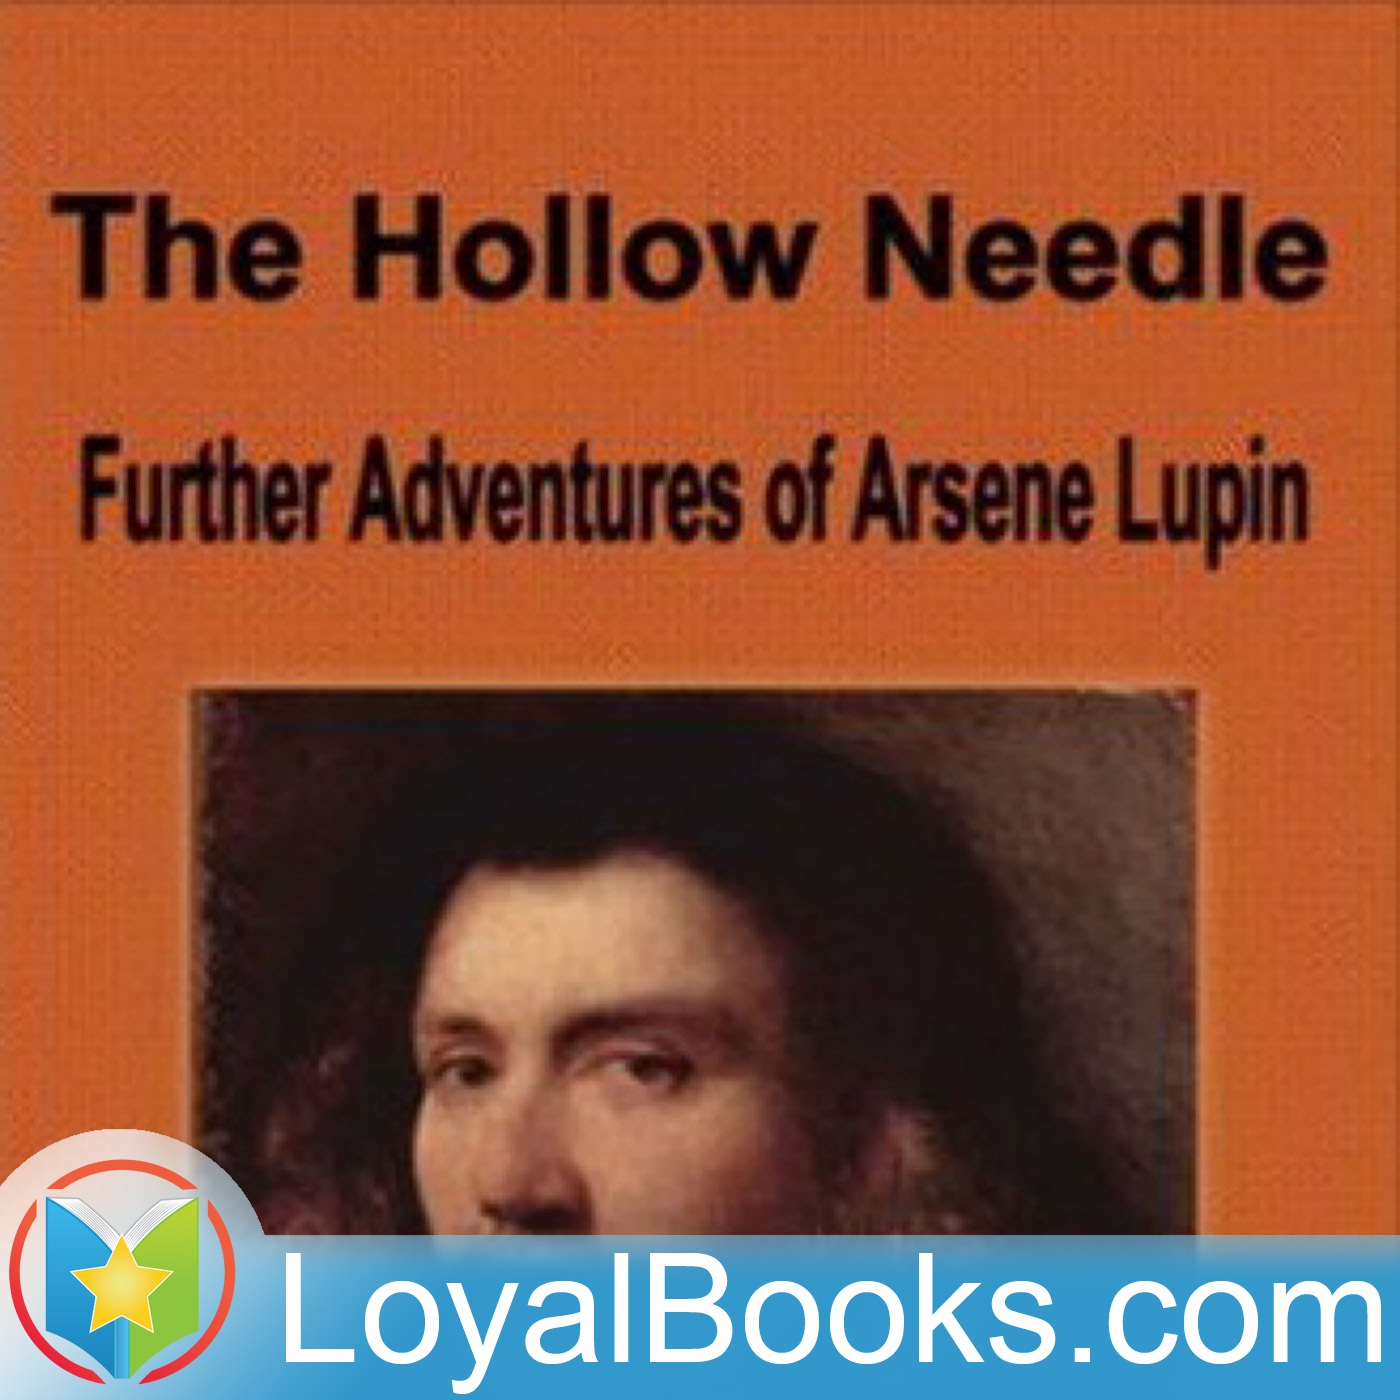 The Hollow Needle: Further Adventures of Arsène Lupin by Maurice Leblanc